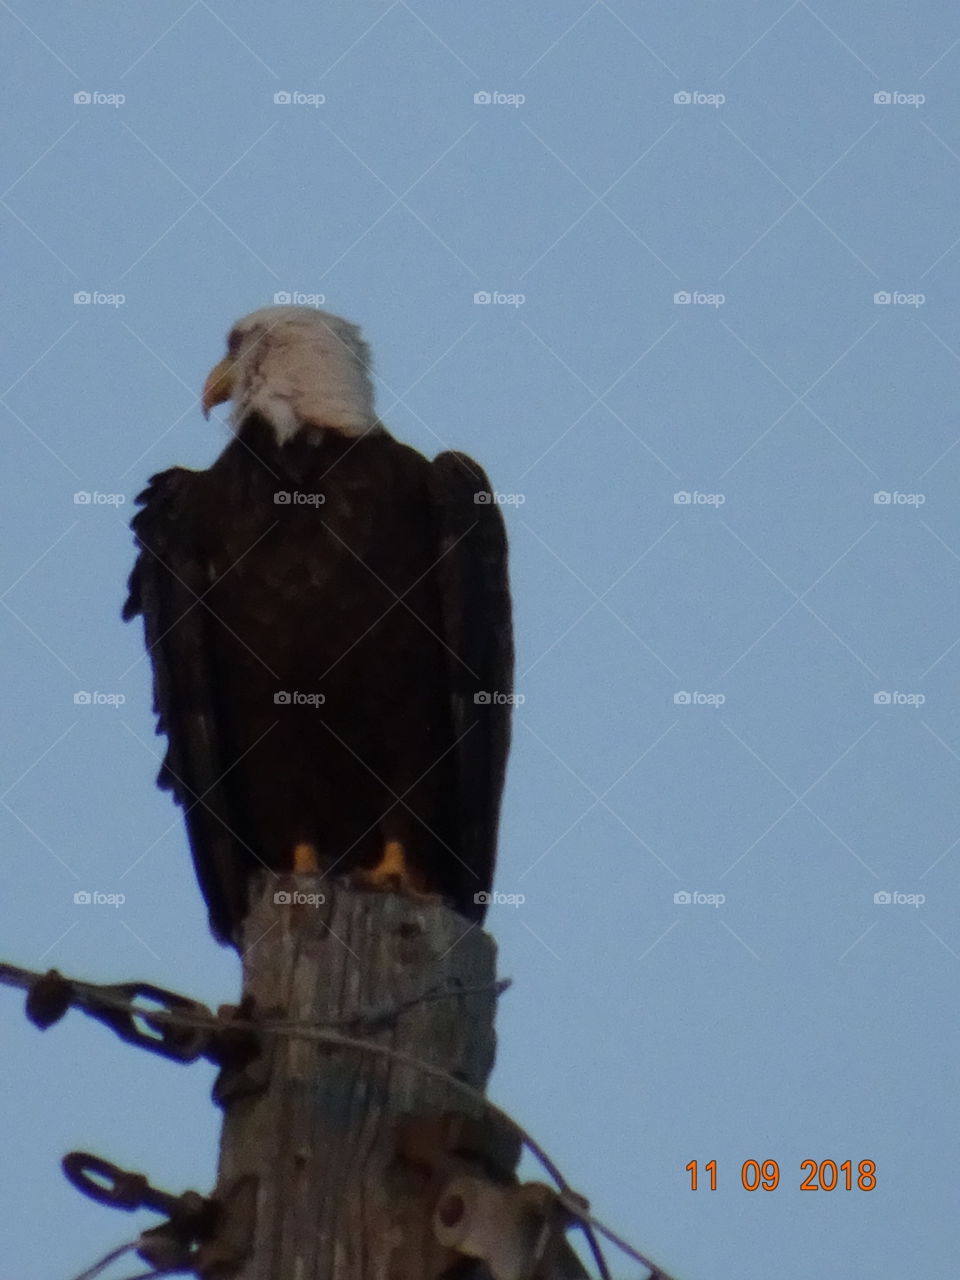 bald eagle with turned head perching on pole